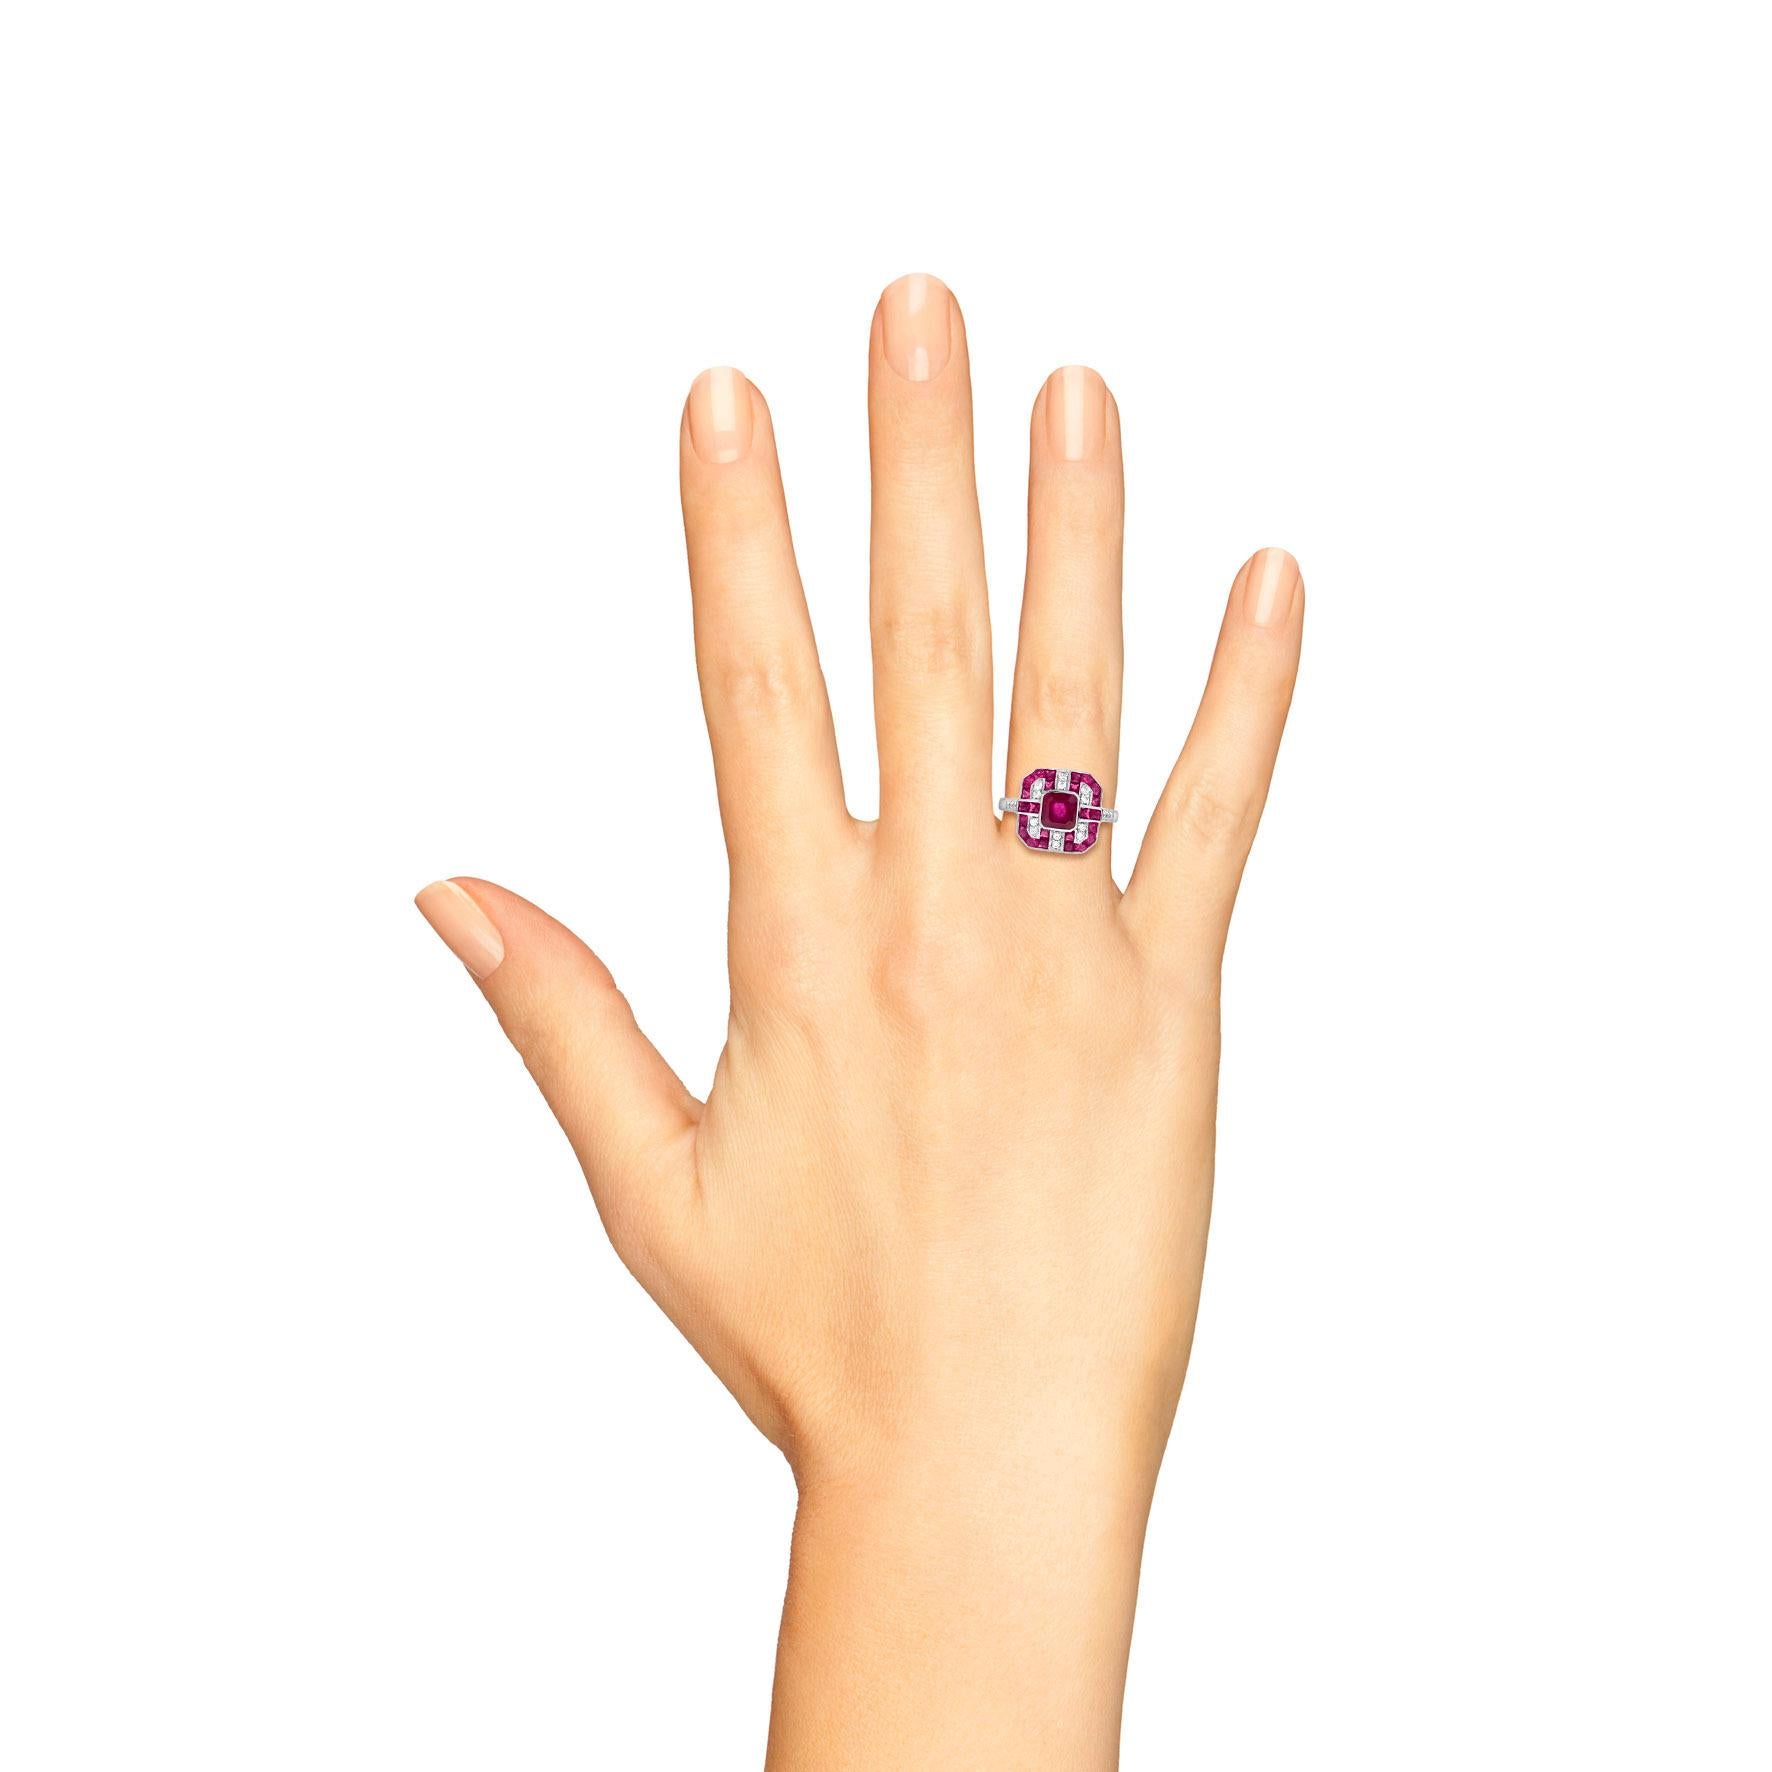 This fabulous finger-hugger, hand fabricated in white gold is charming with a ruby center weighting 1.20 carat (approx.). The stone is presented within an octagonal frame accented with a small transitional round cut diamond on each corner,